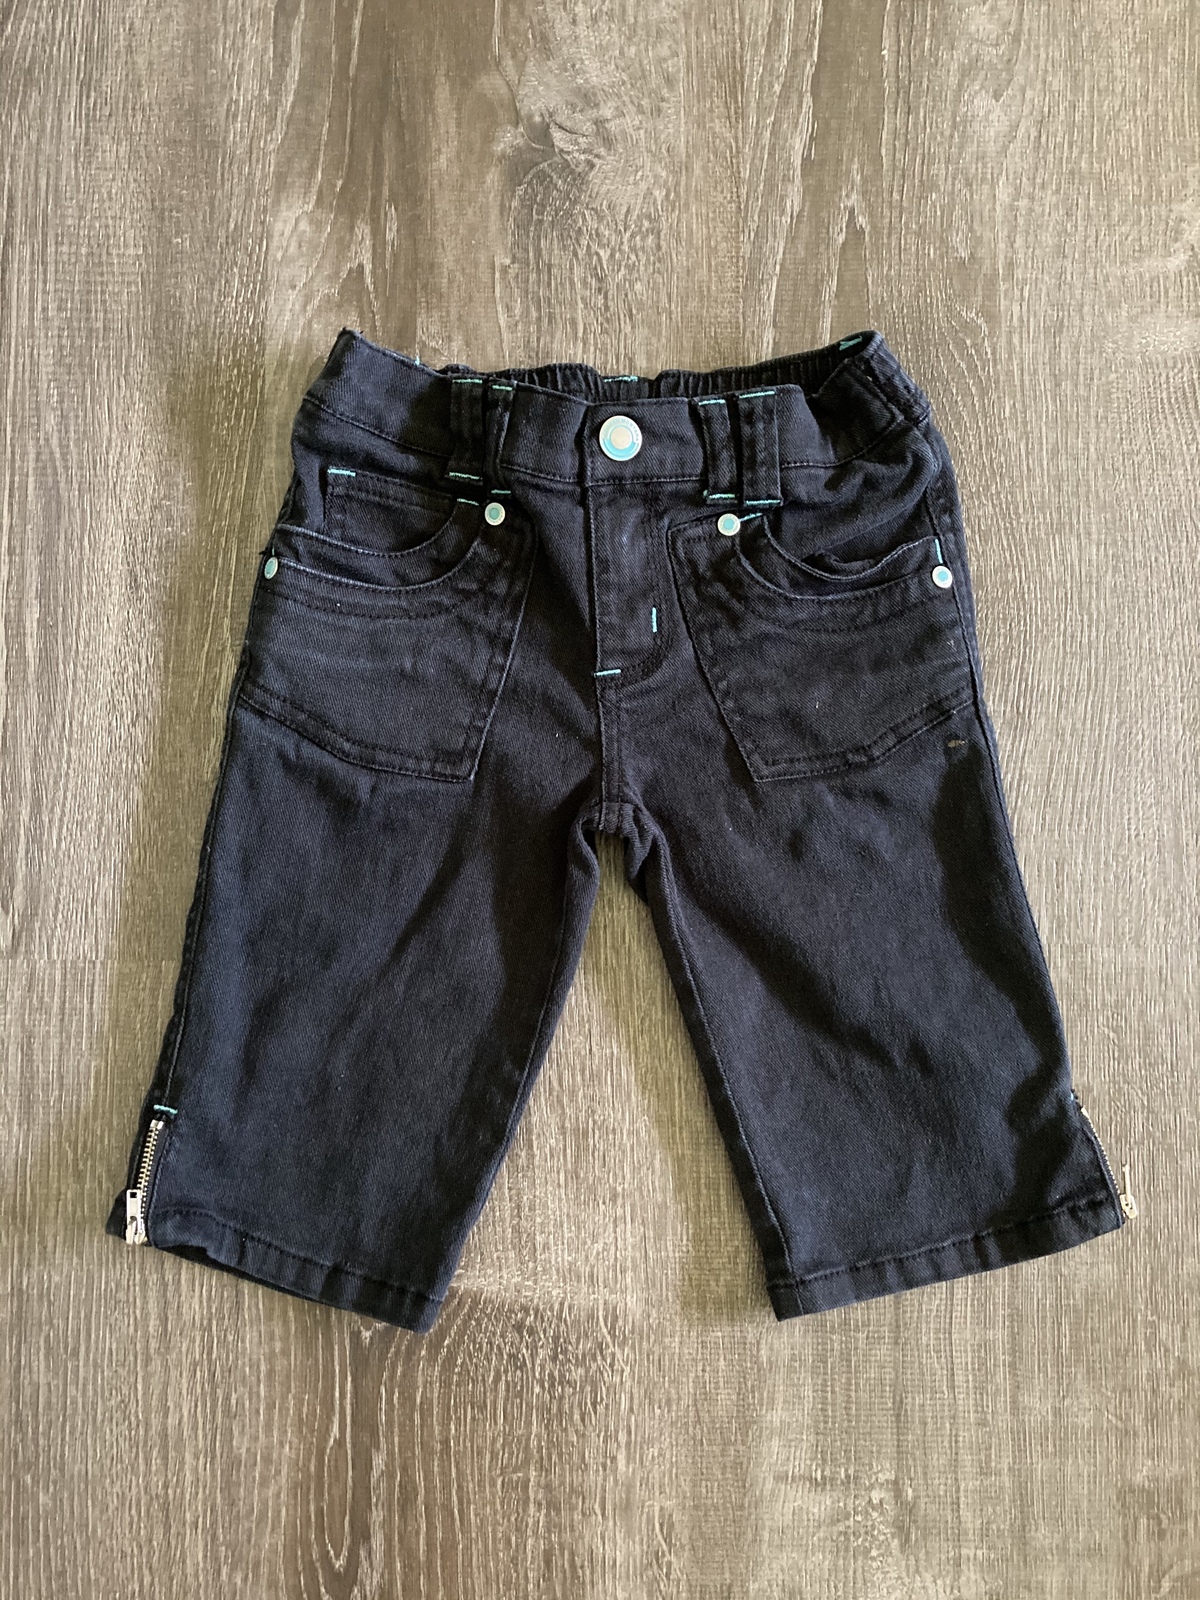 Primary image for Hannah Montana Black Jean Shorts Size 6